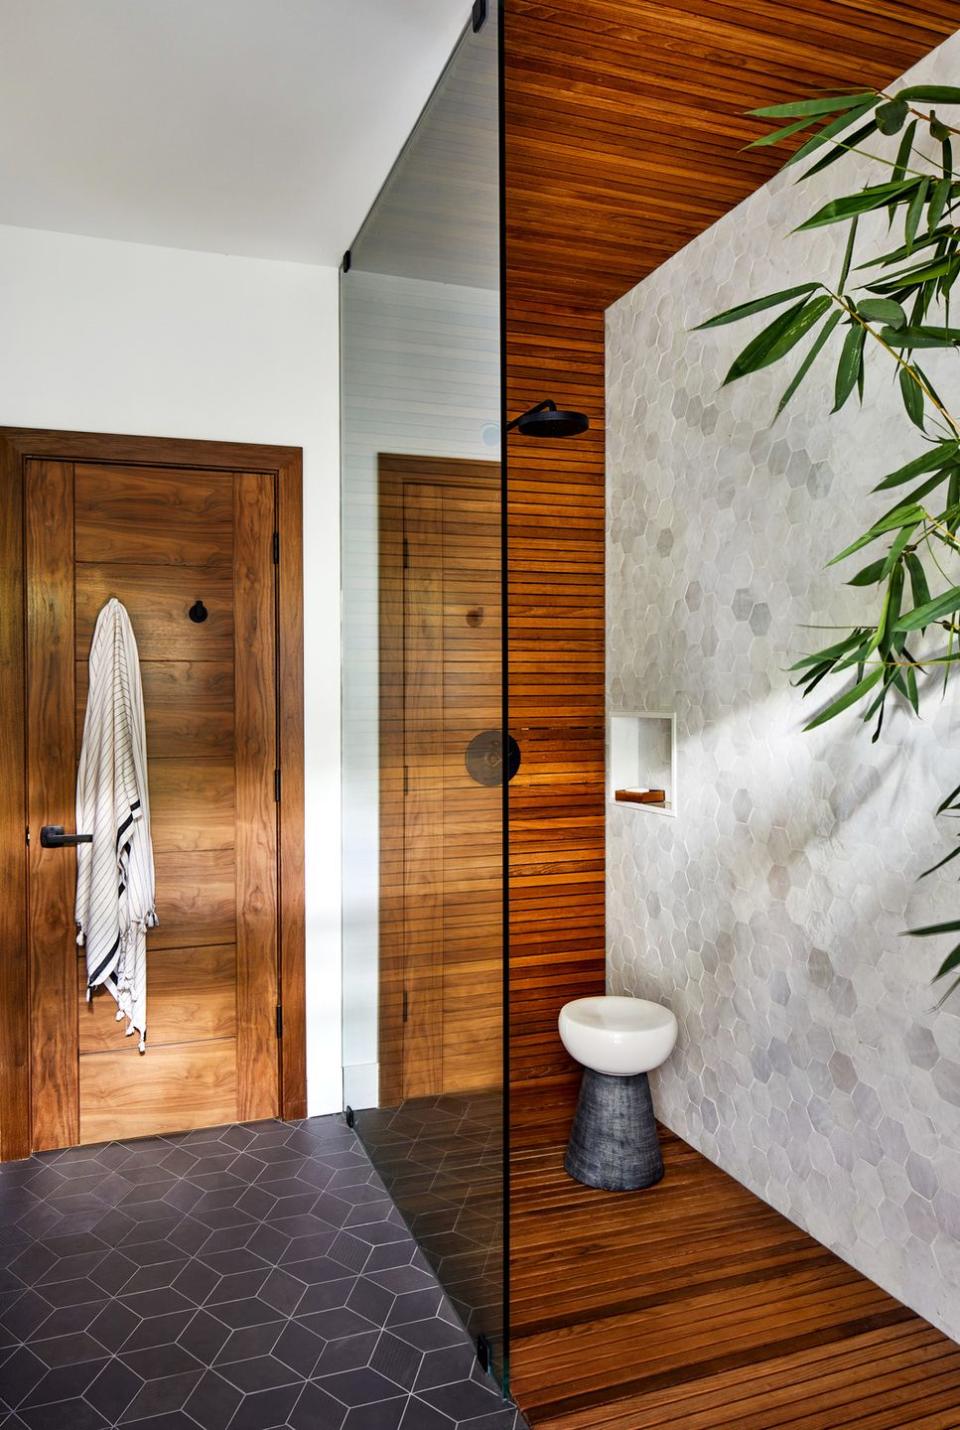 vacation home in maui, hawaii designed by breeze giannasio interiors guest bath with teak wrapped walls, this room opens to the pool area via a connected outdoor shower wall tile tile stool made goods showerhead california faucets floor tile mutina towel hooks signature hardware